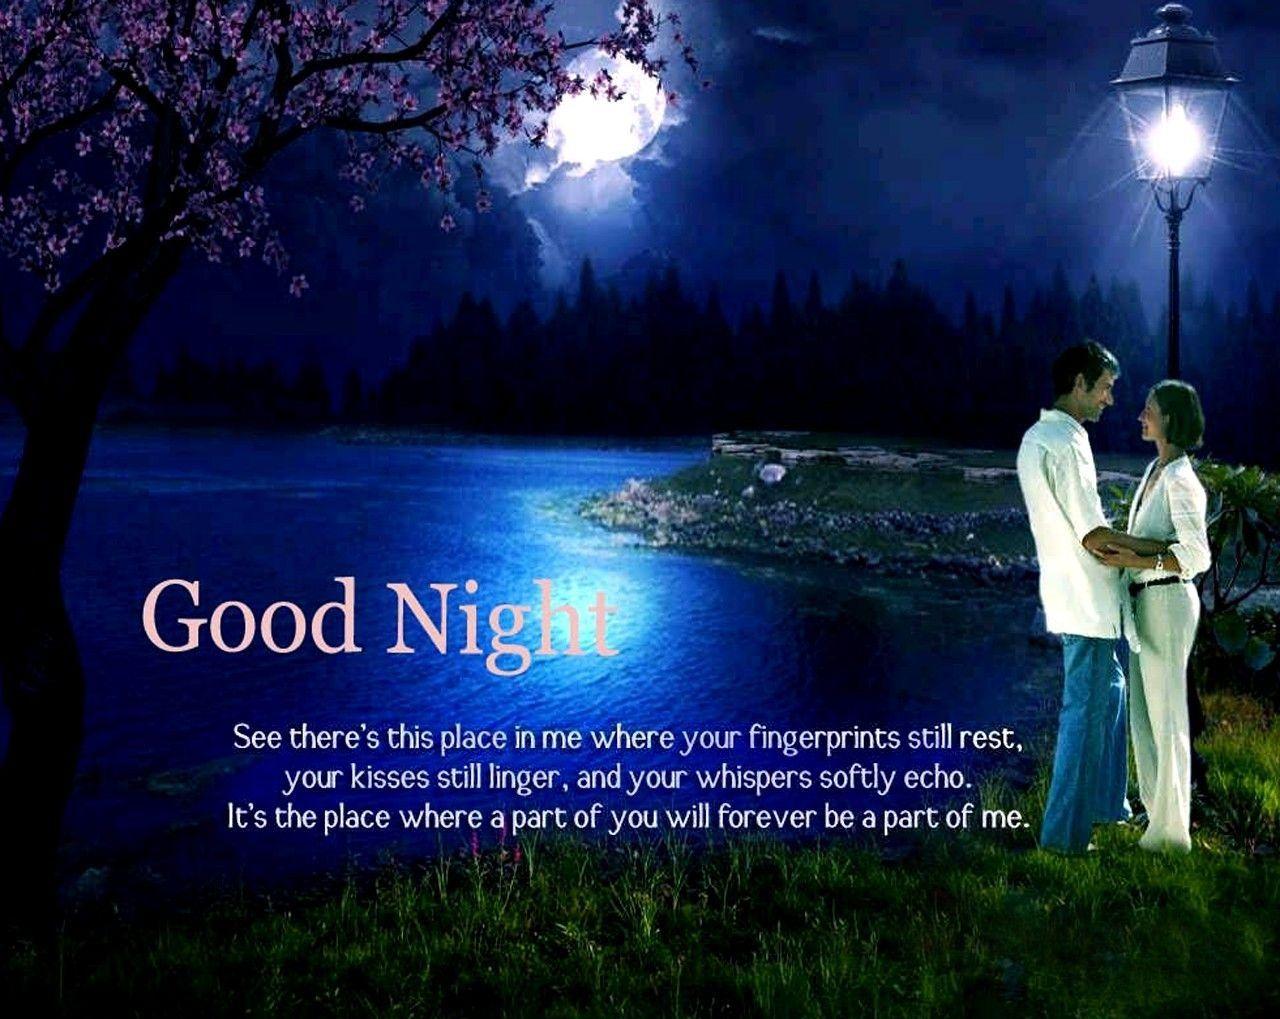 Best Romantic Good Night Picture & Wallpaper For Love